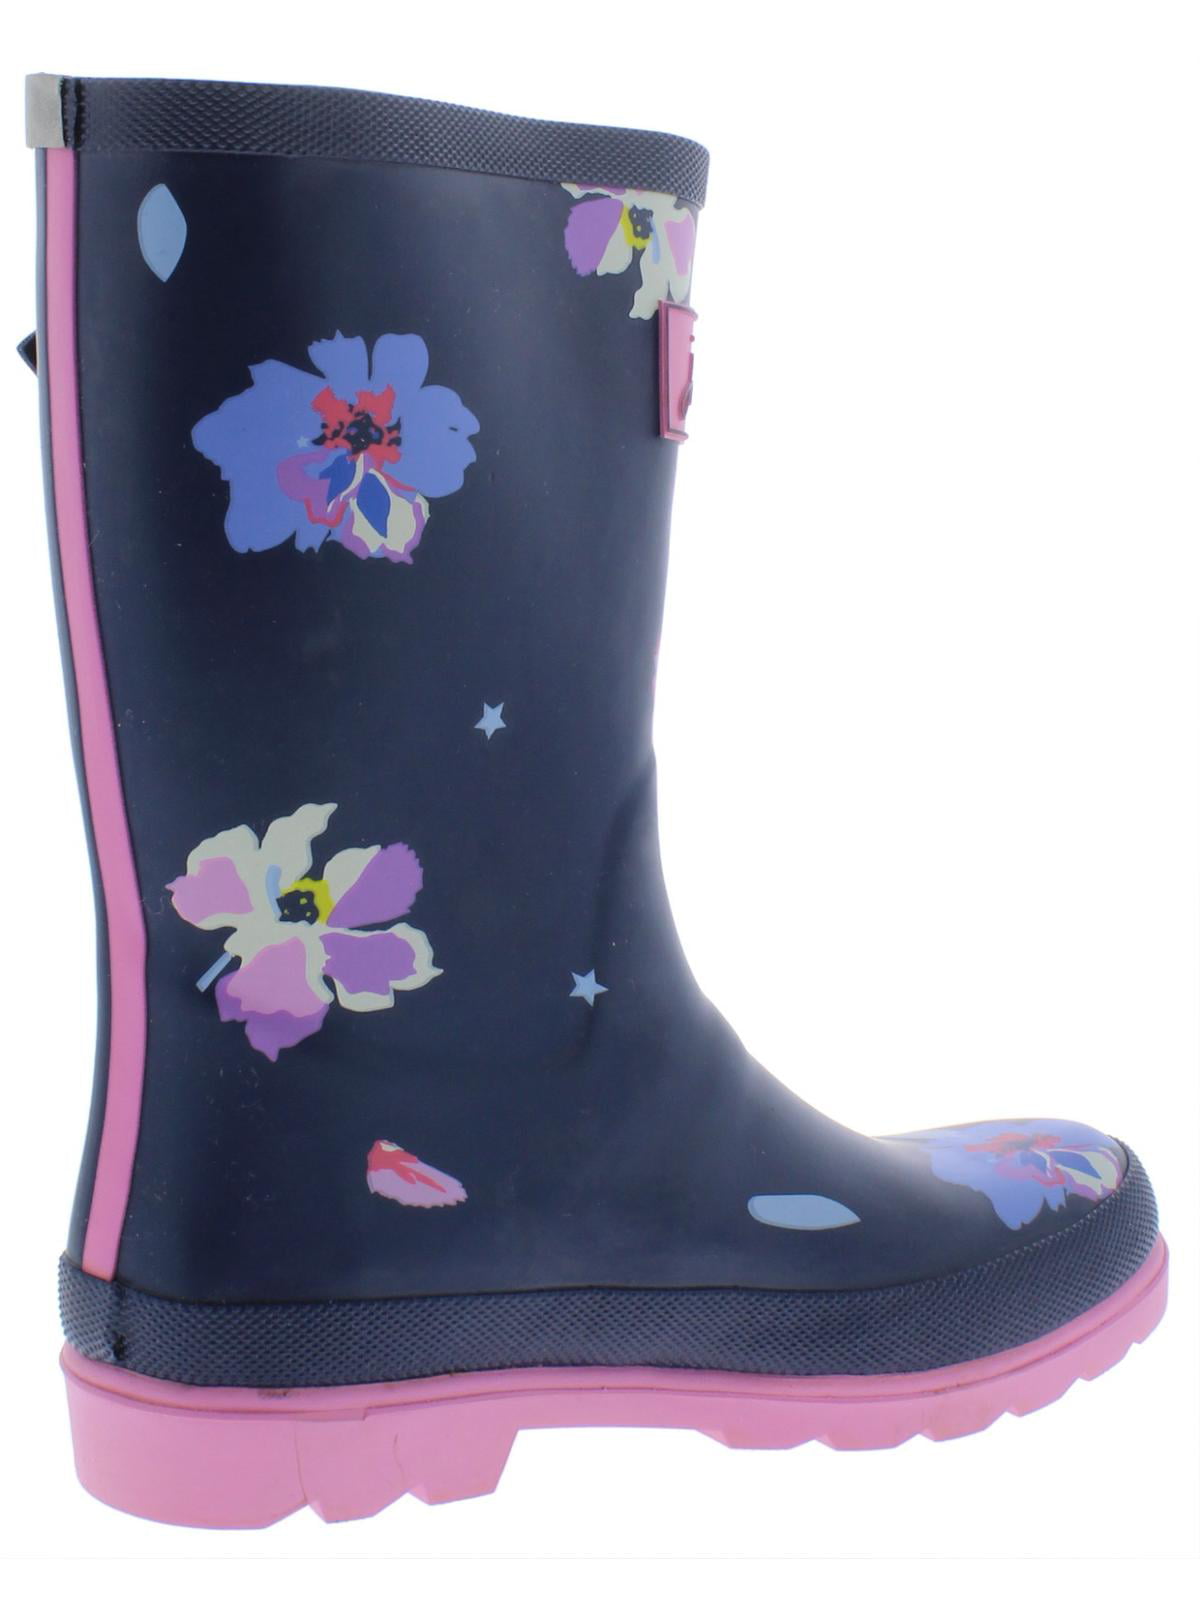 Joules Junior Girls Wellies-Stylish Patterned Wellington Boots 